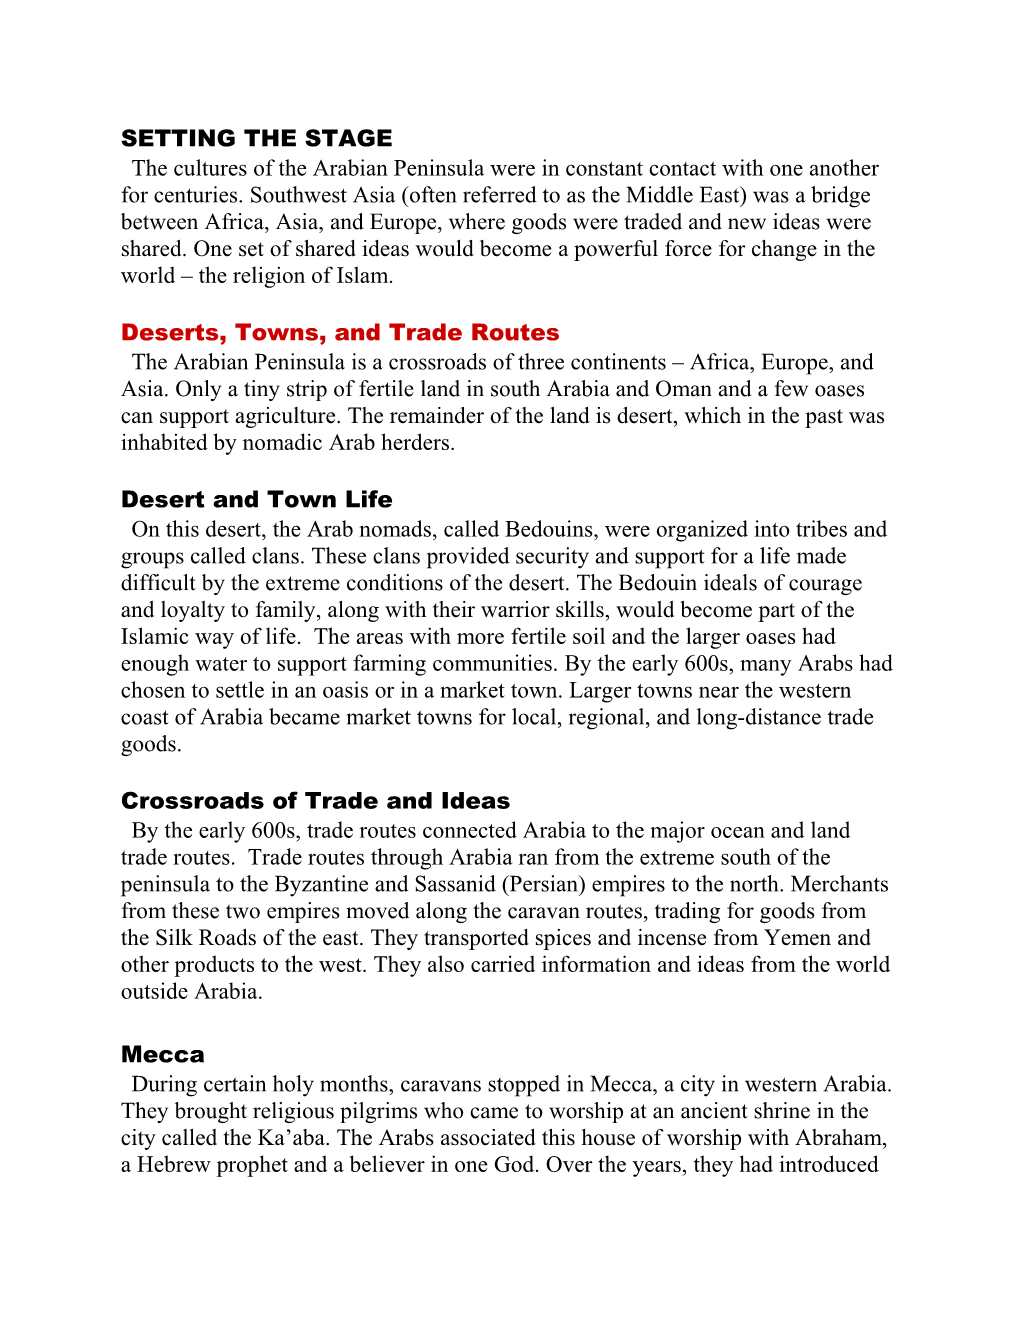 Deserts, Towns, and Trade Routes